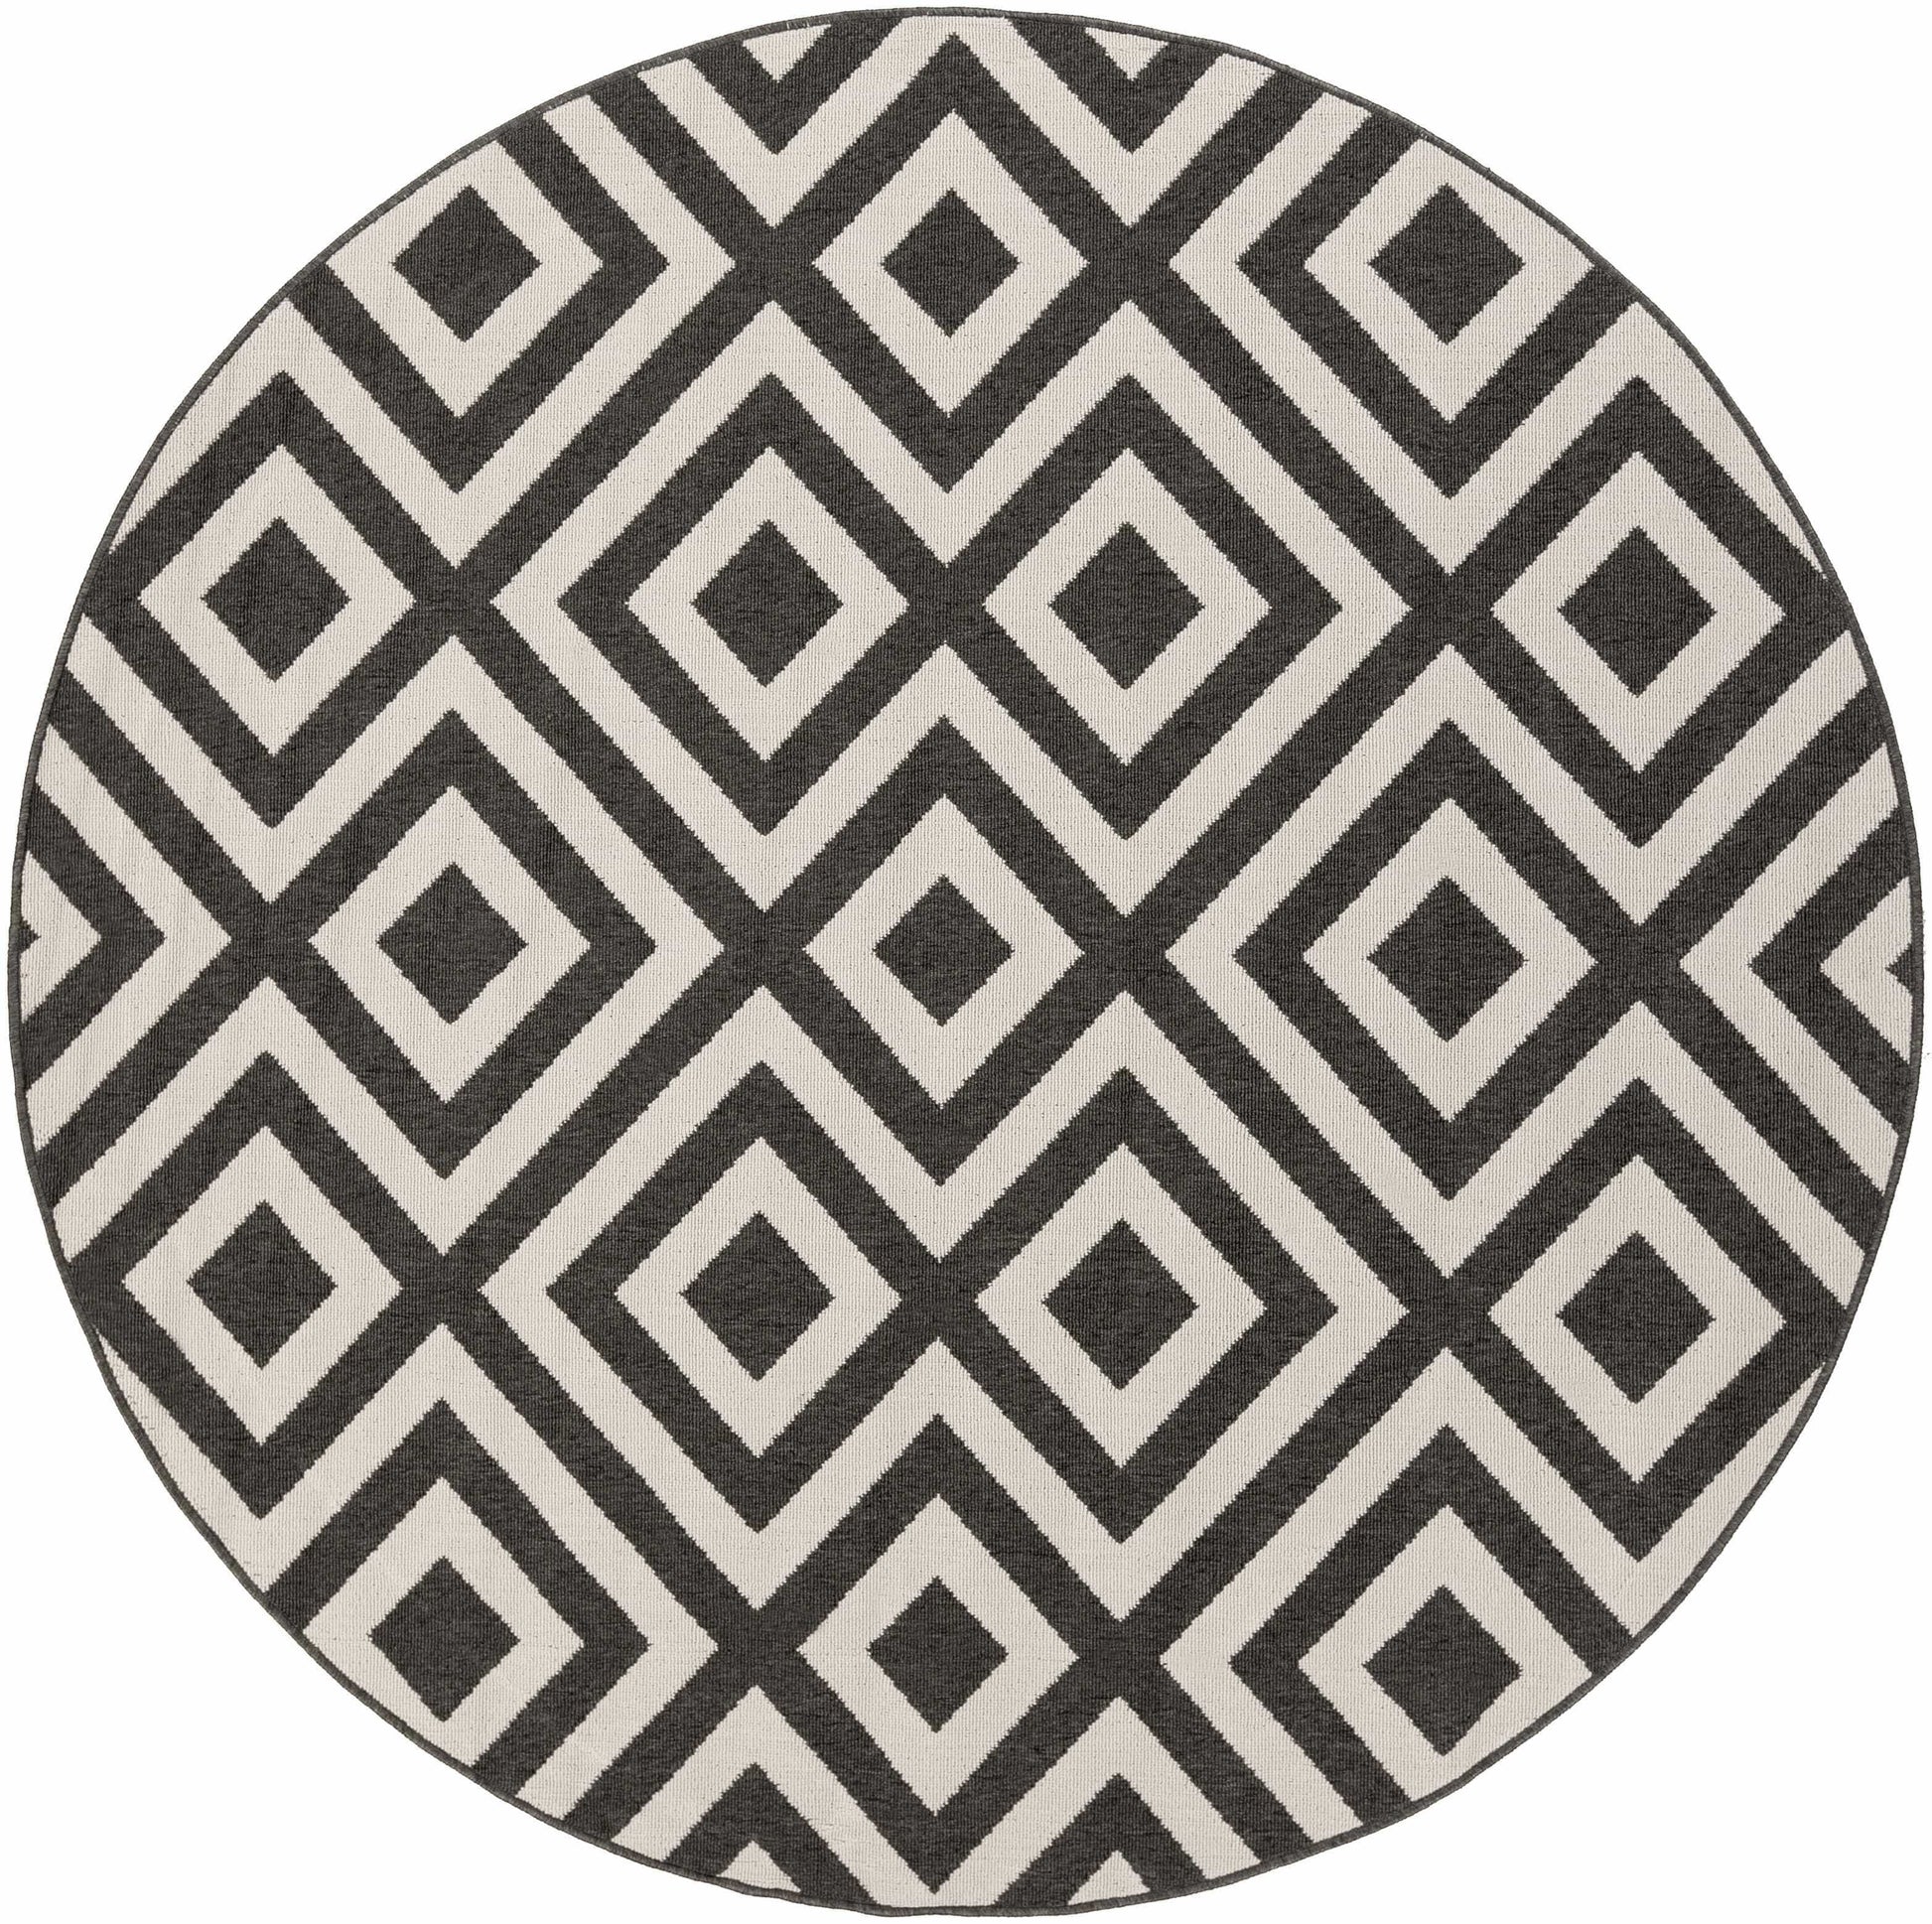 Boutique Rugs Rugs 5'3" Round Spilsby Outdoor Rug